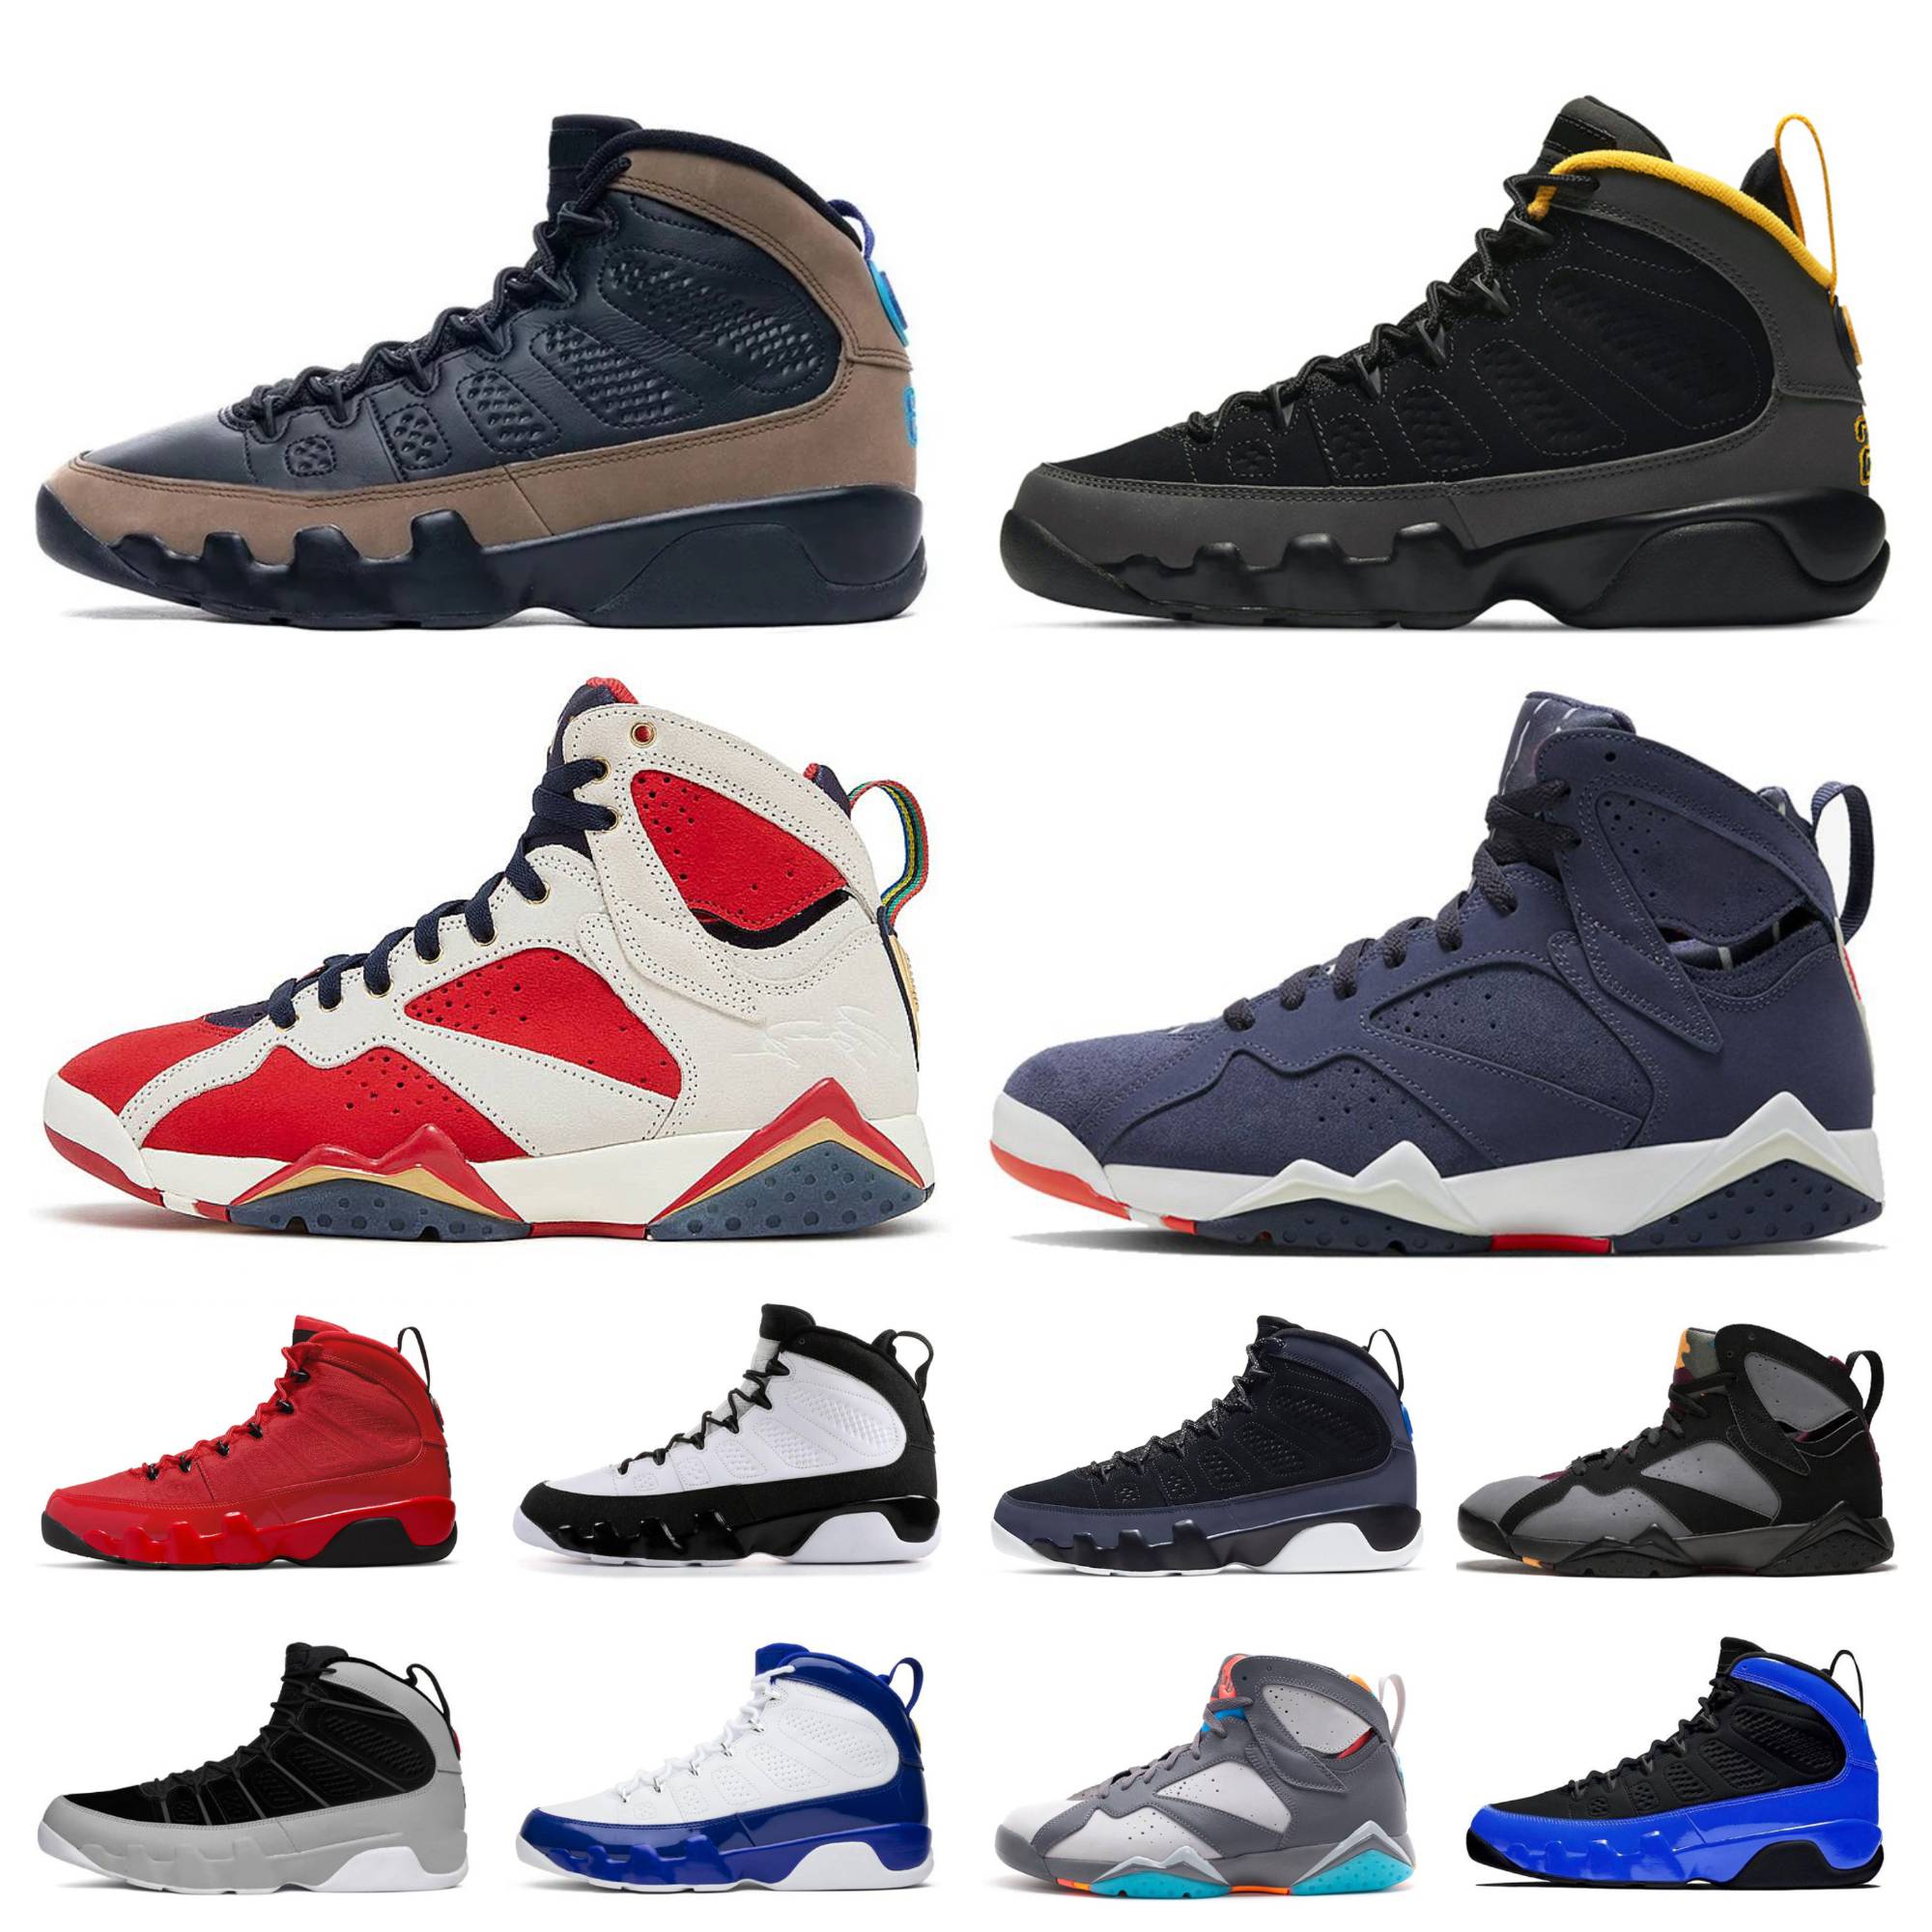 

Jumpman Mens 9 9s OG Basketball Shoes Fire Red University Gold Racer Blue Reflective Motorboat Black White Do It Change The World UNC Chile Red Particle Grey Sneakers, Shoes lace